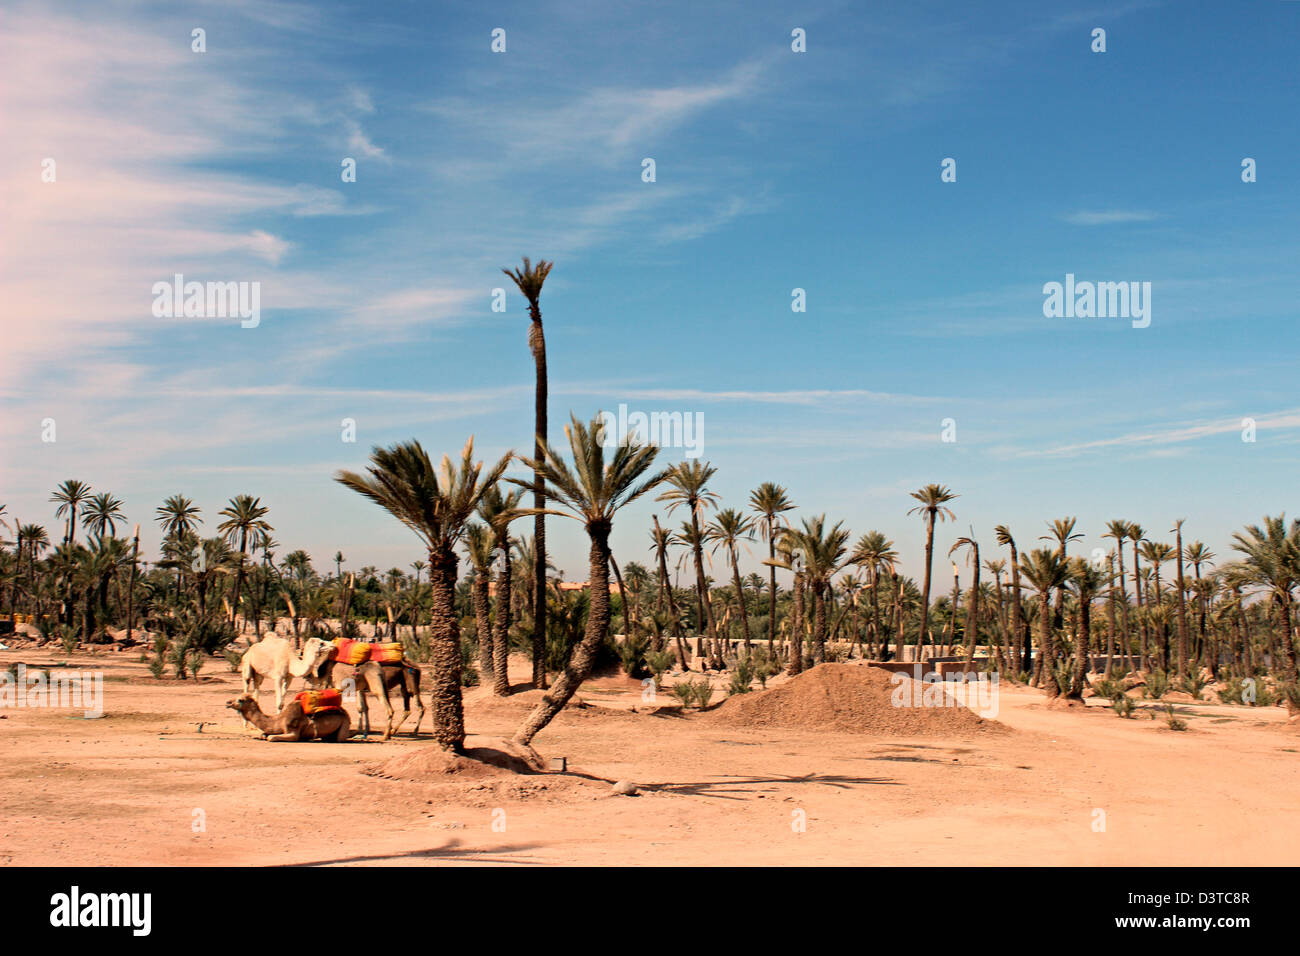 Camels resting between palm trees! Marrakech is a tale of Arabian Nights! Stock Photo